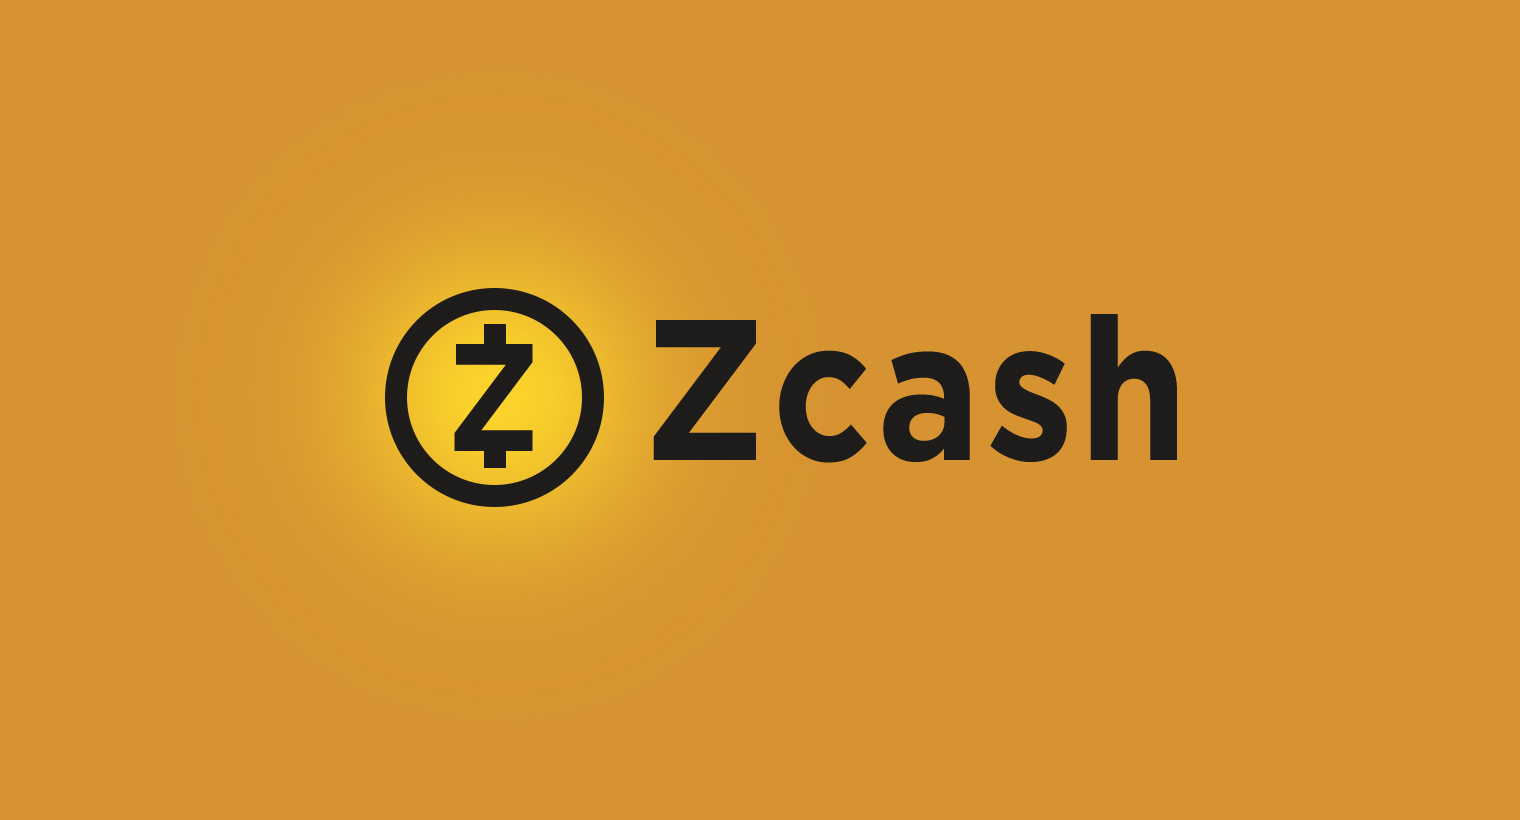 What is a Zcash